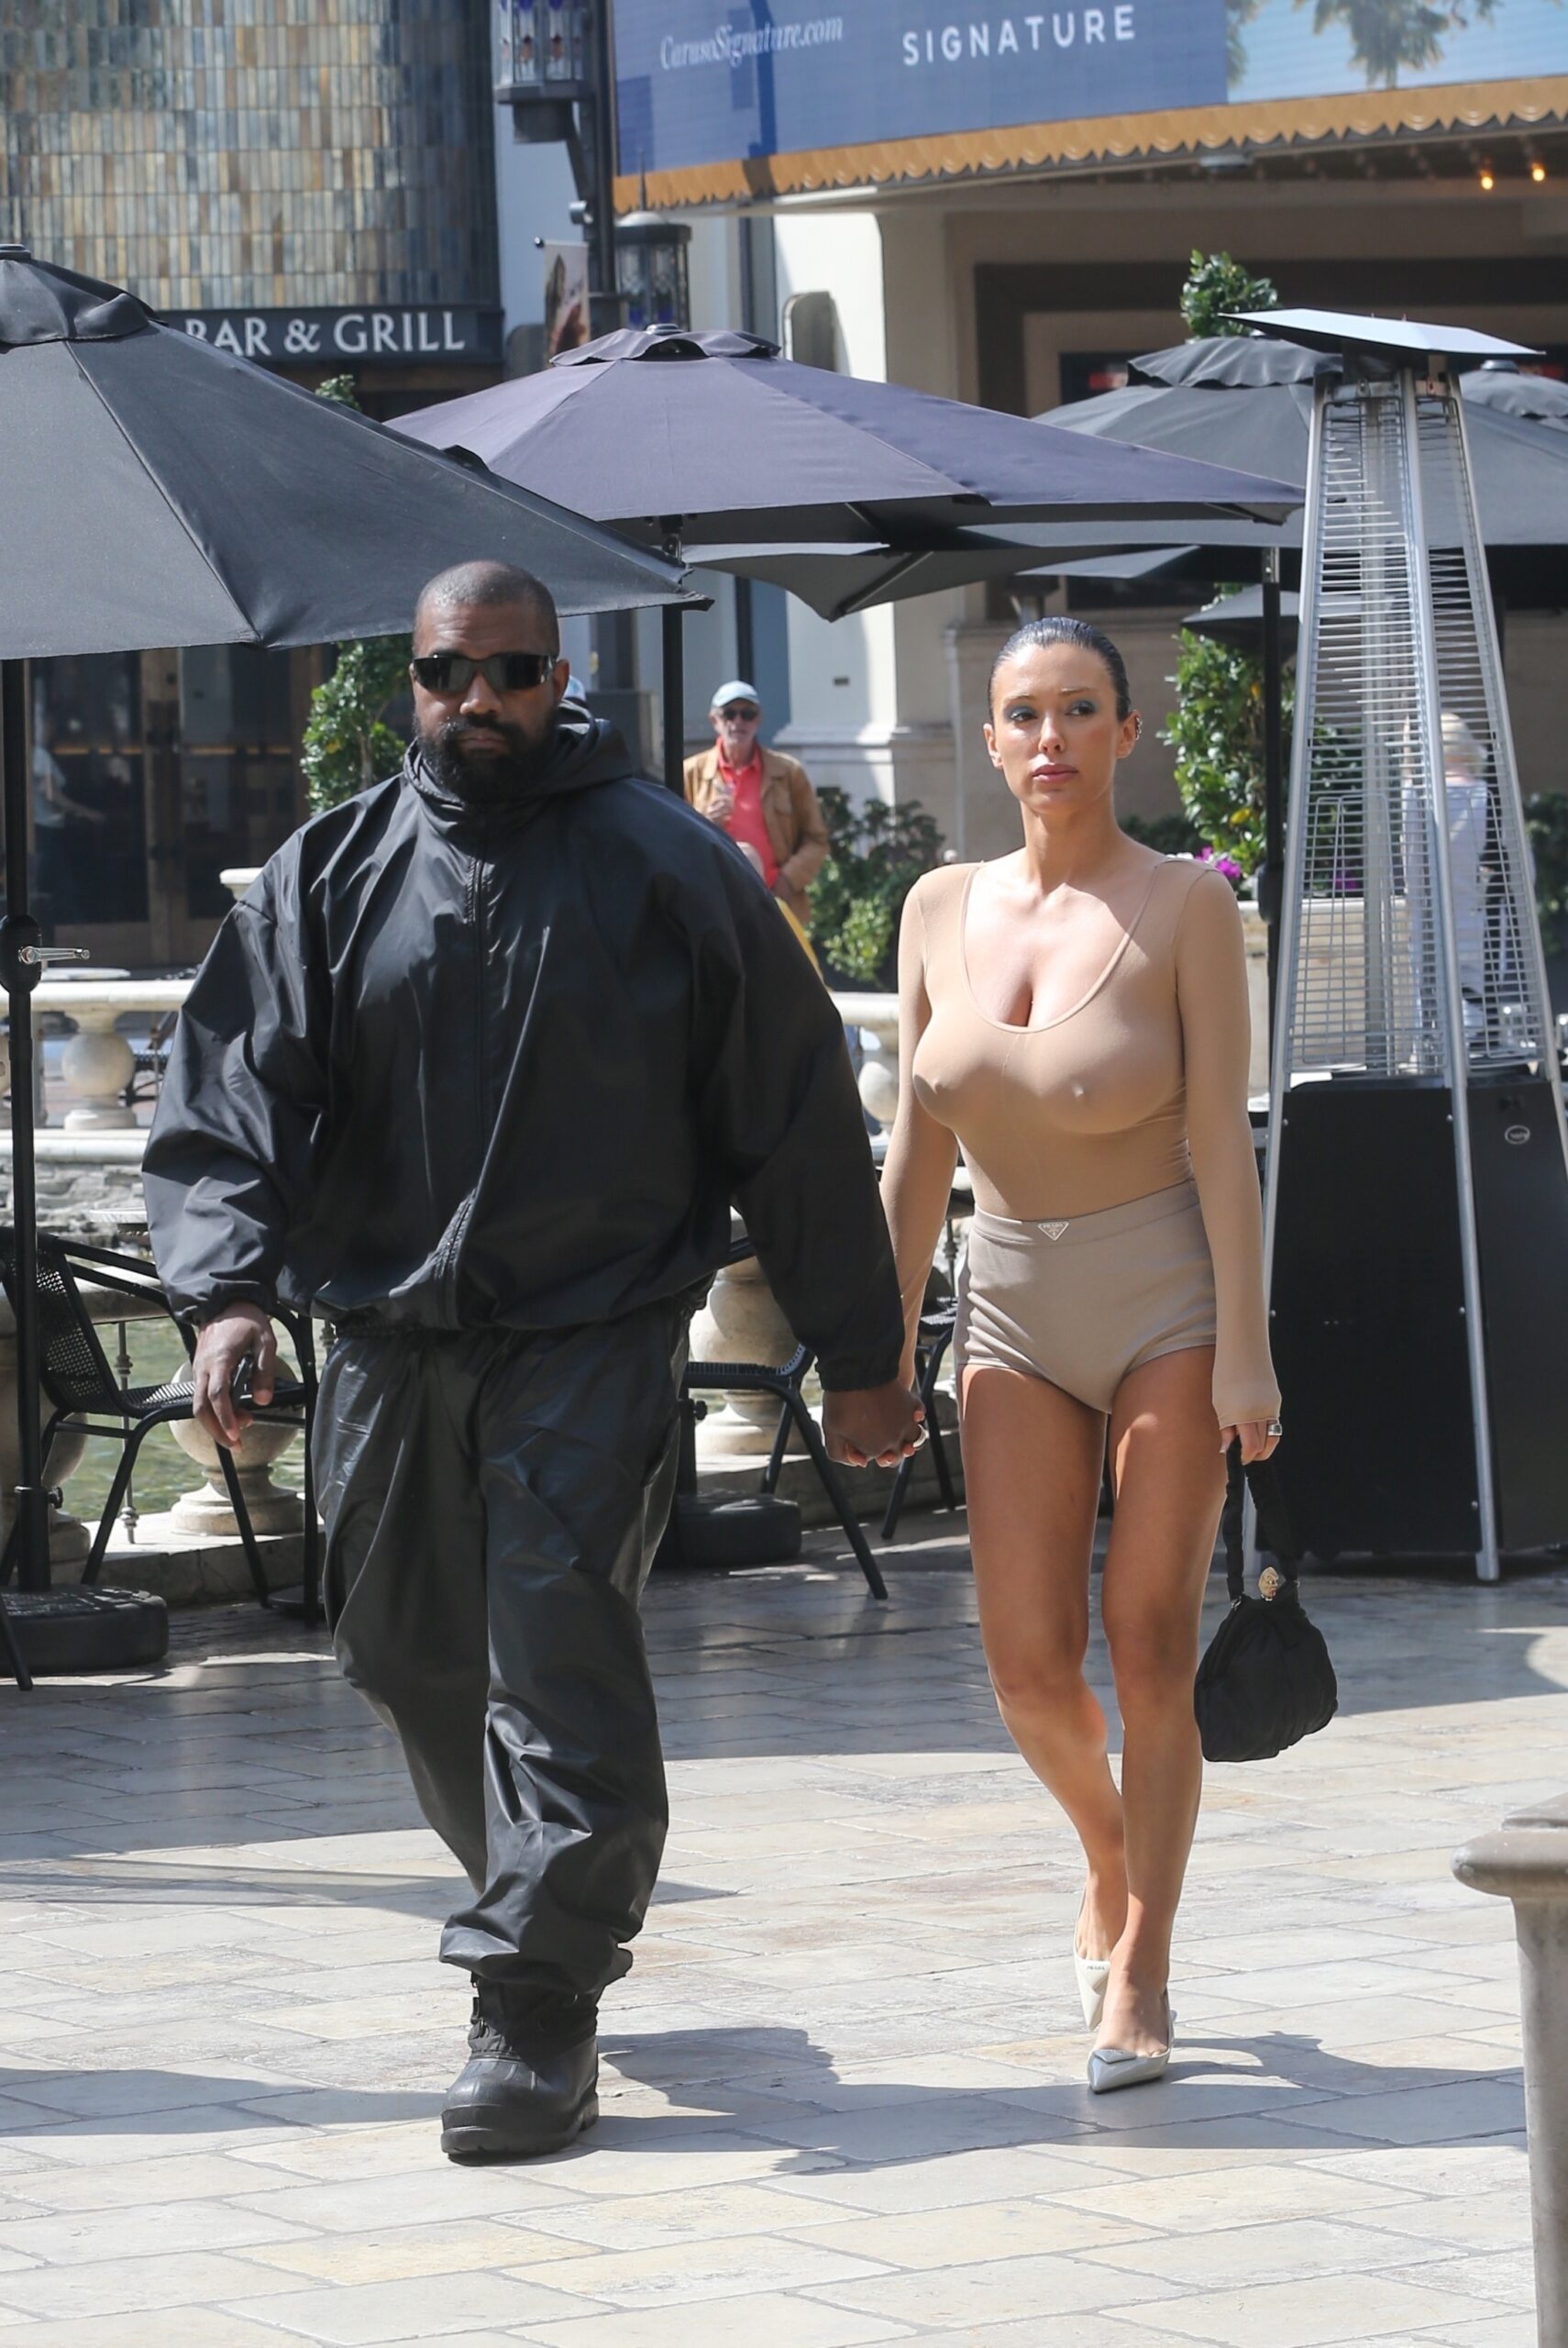 Bianca Censori wears sheer tights as a top for another Cheesecake Factory date with Kanye West